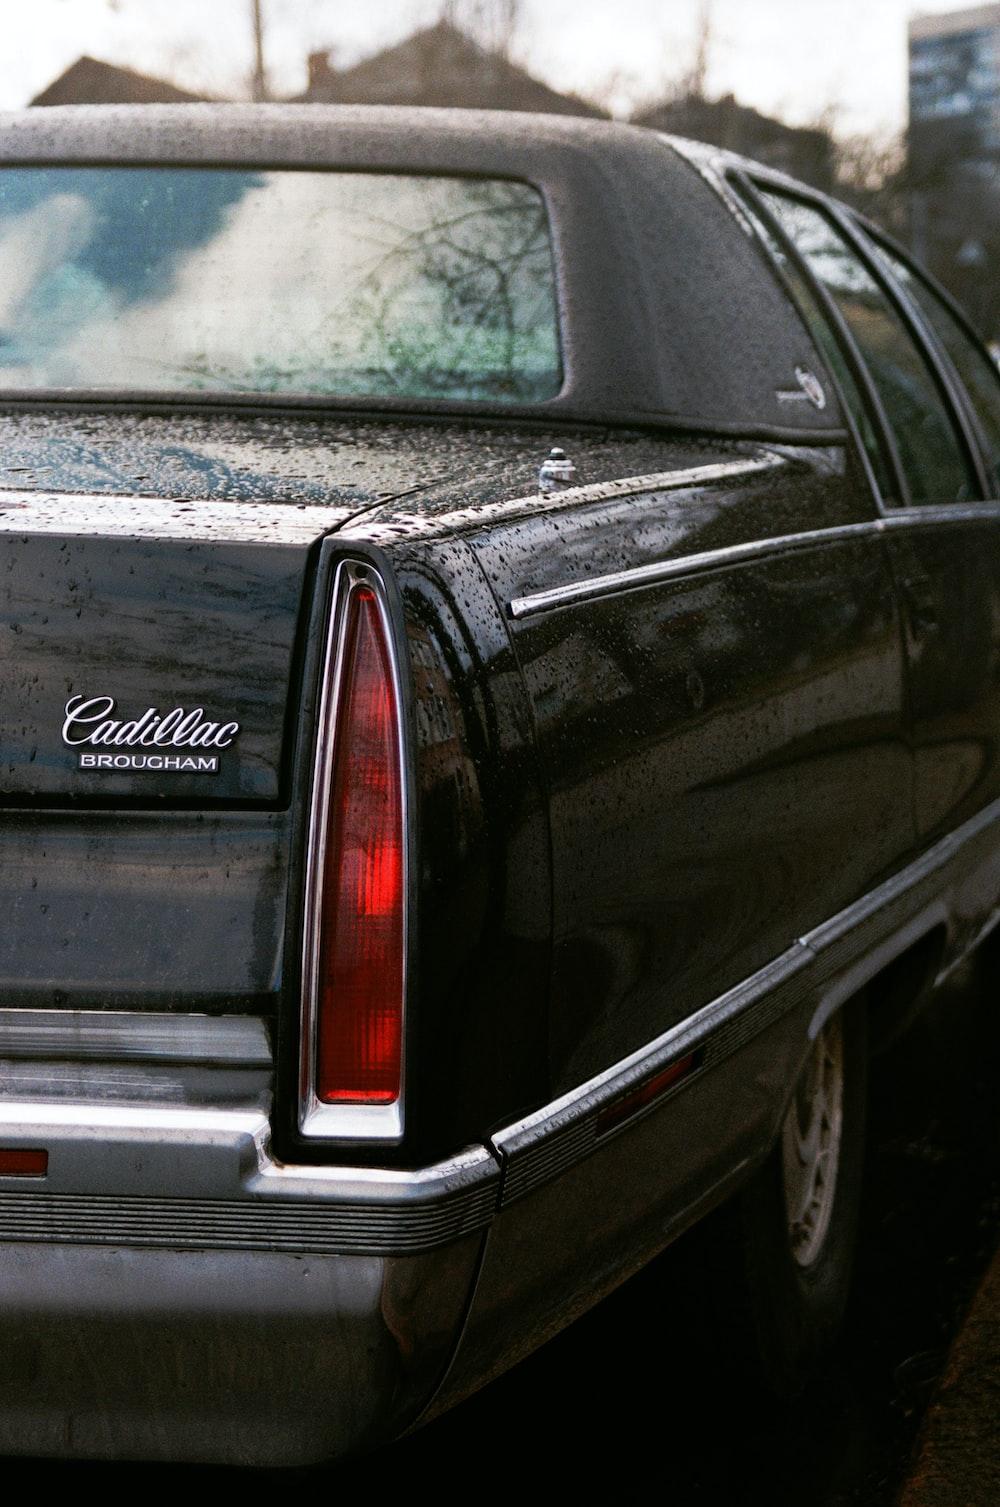 Cadillac Pictures Image